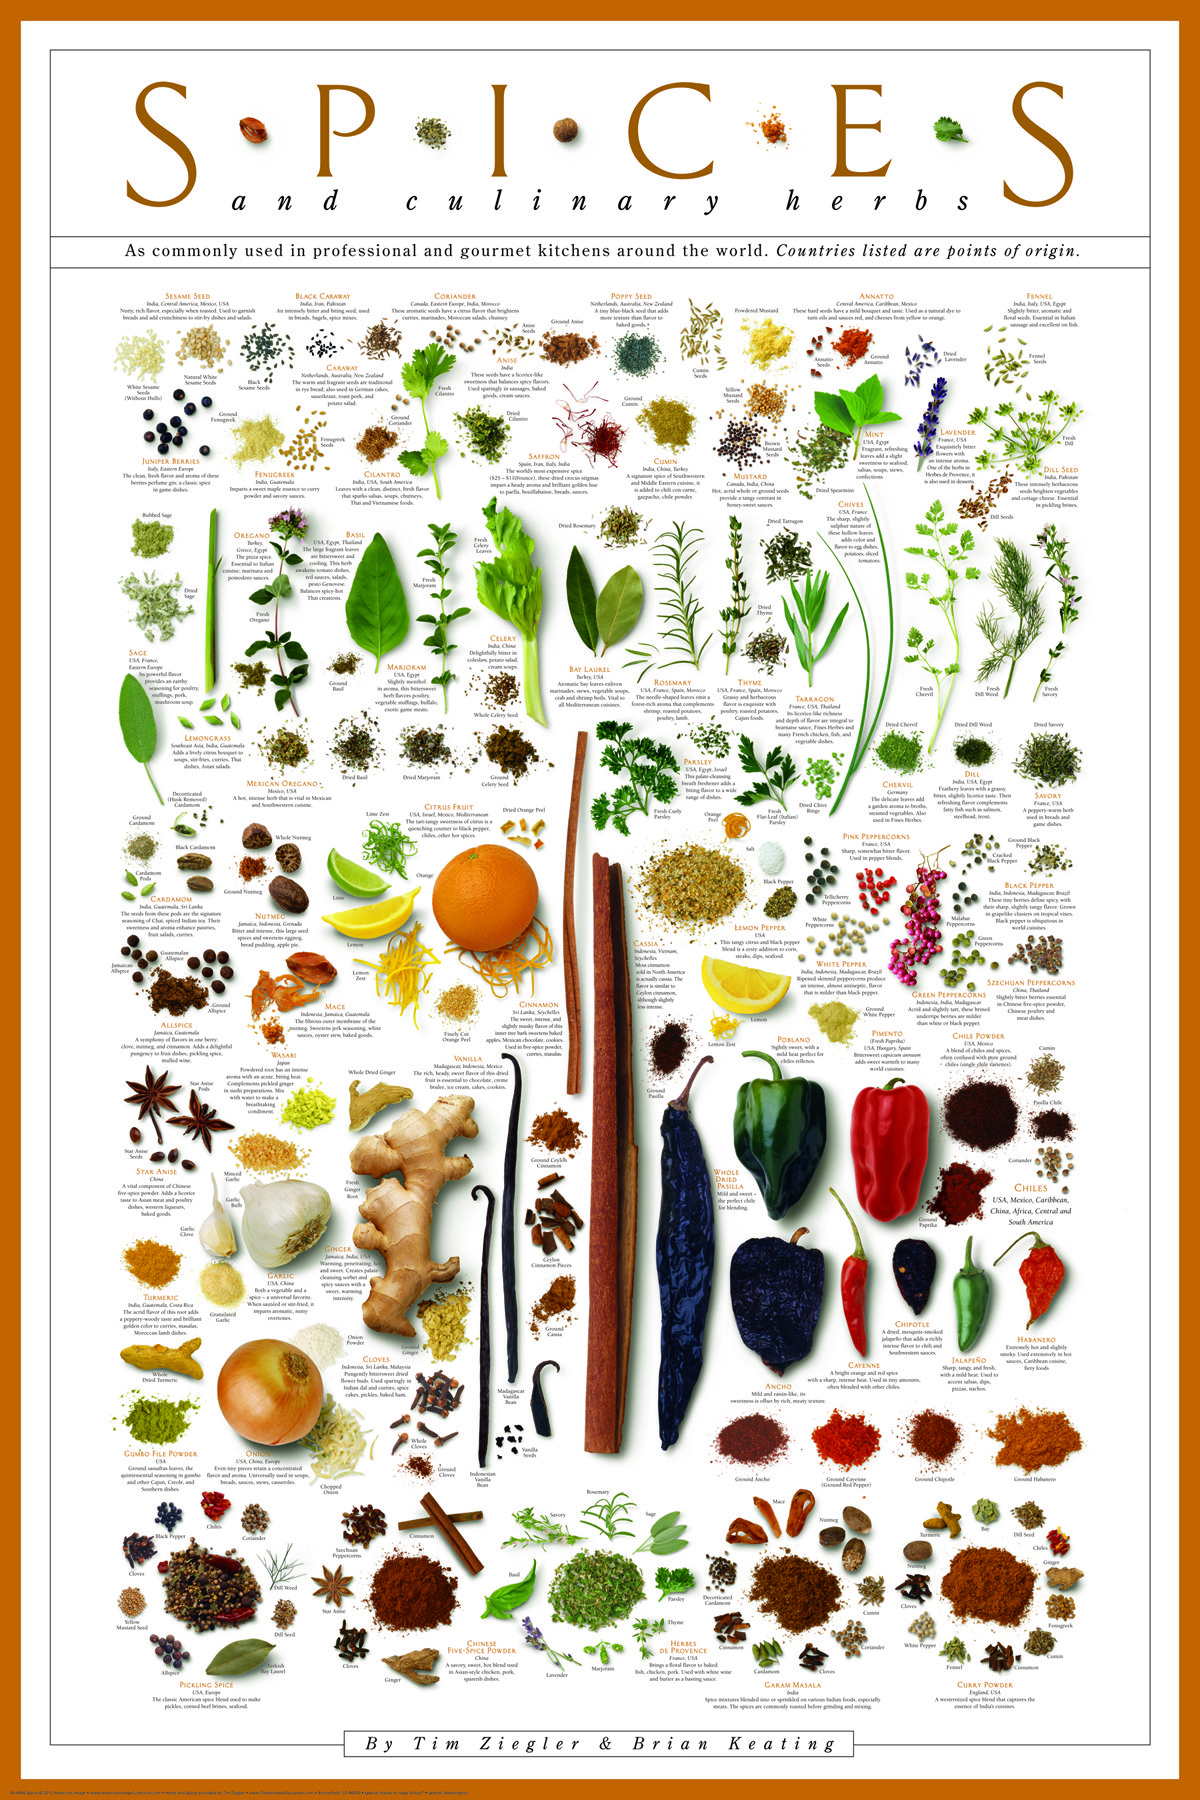 The poster, with images of spices, their names, and notes about them